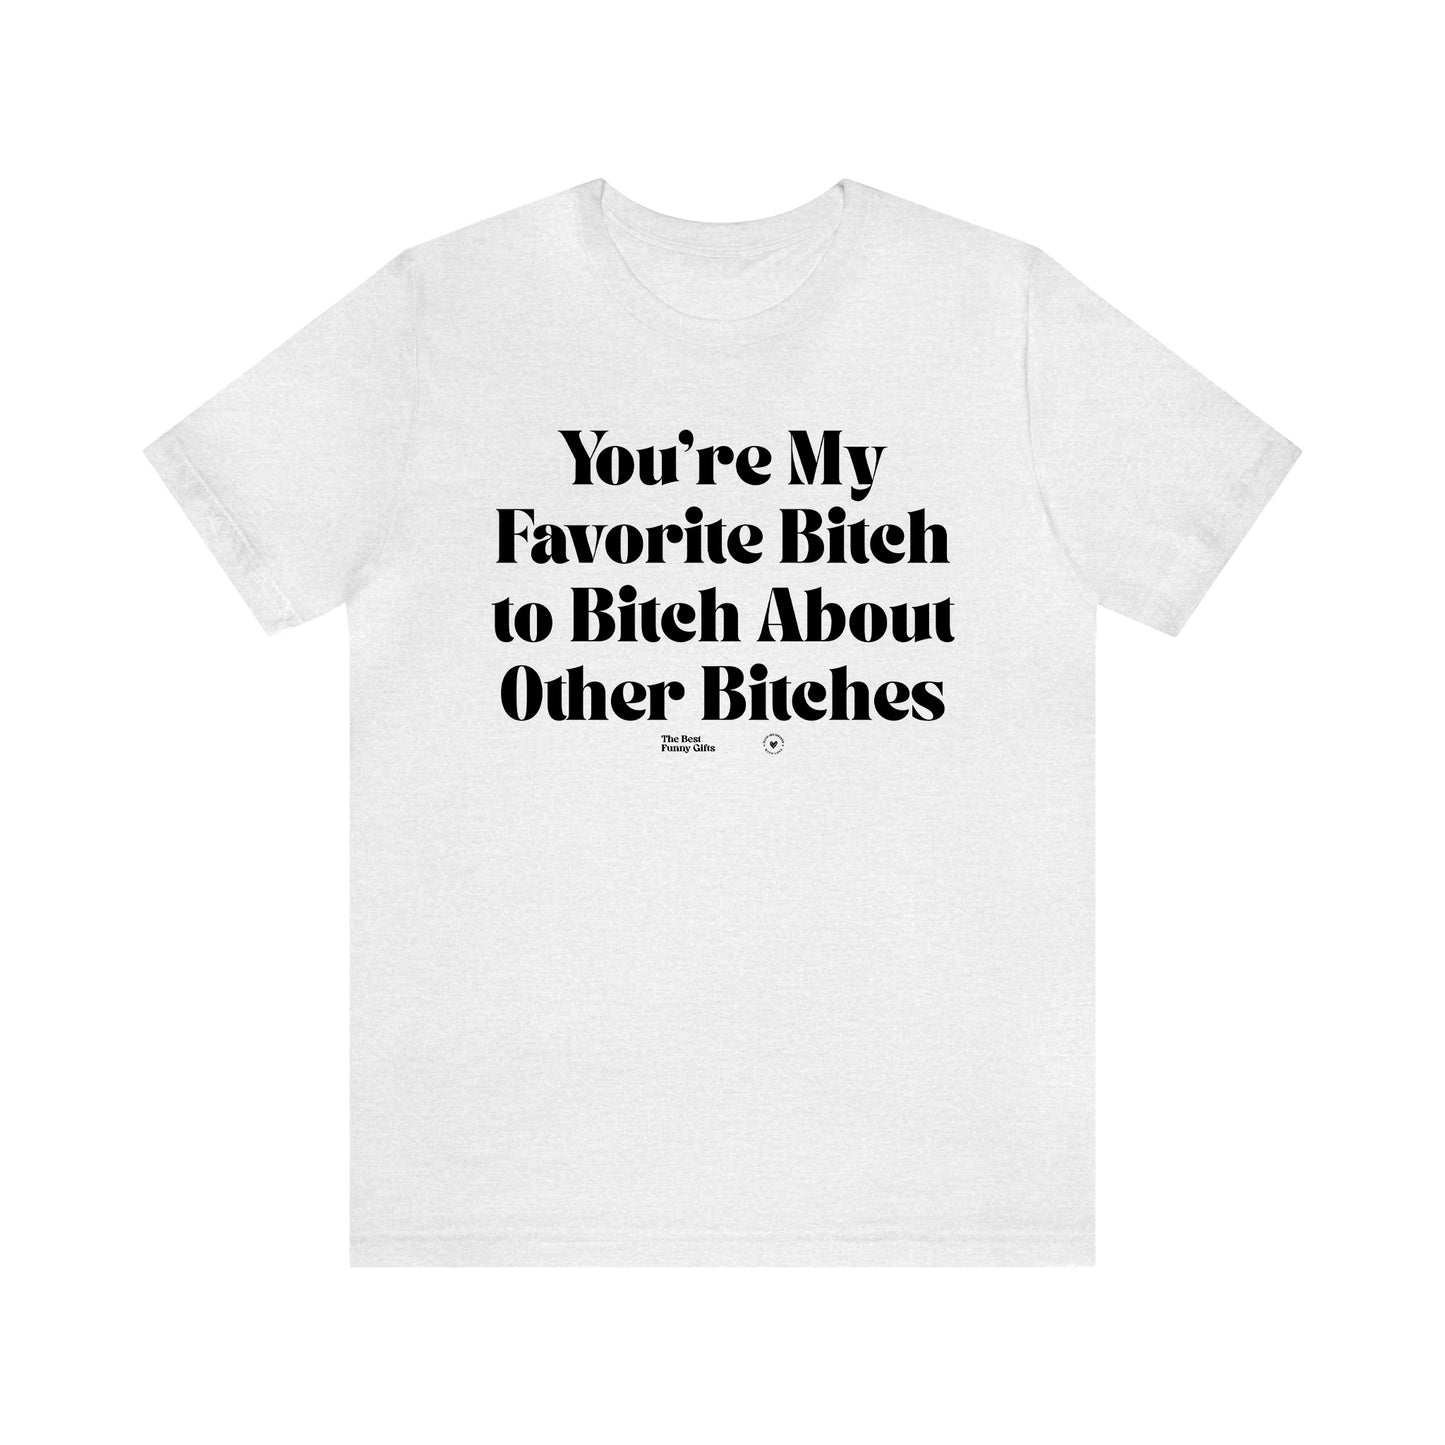 Funny Shirts for Women - You're My Favorite Bitch to Bitch About Other Bitches - Women’s T Shirts